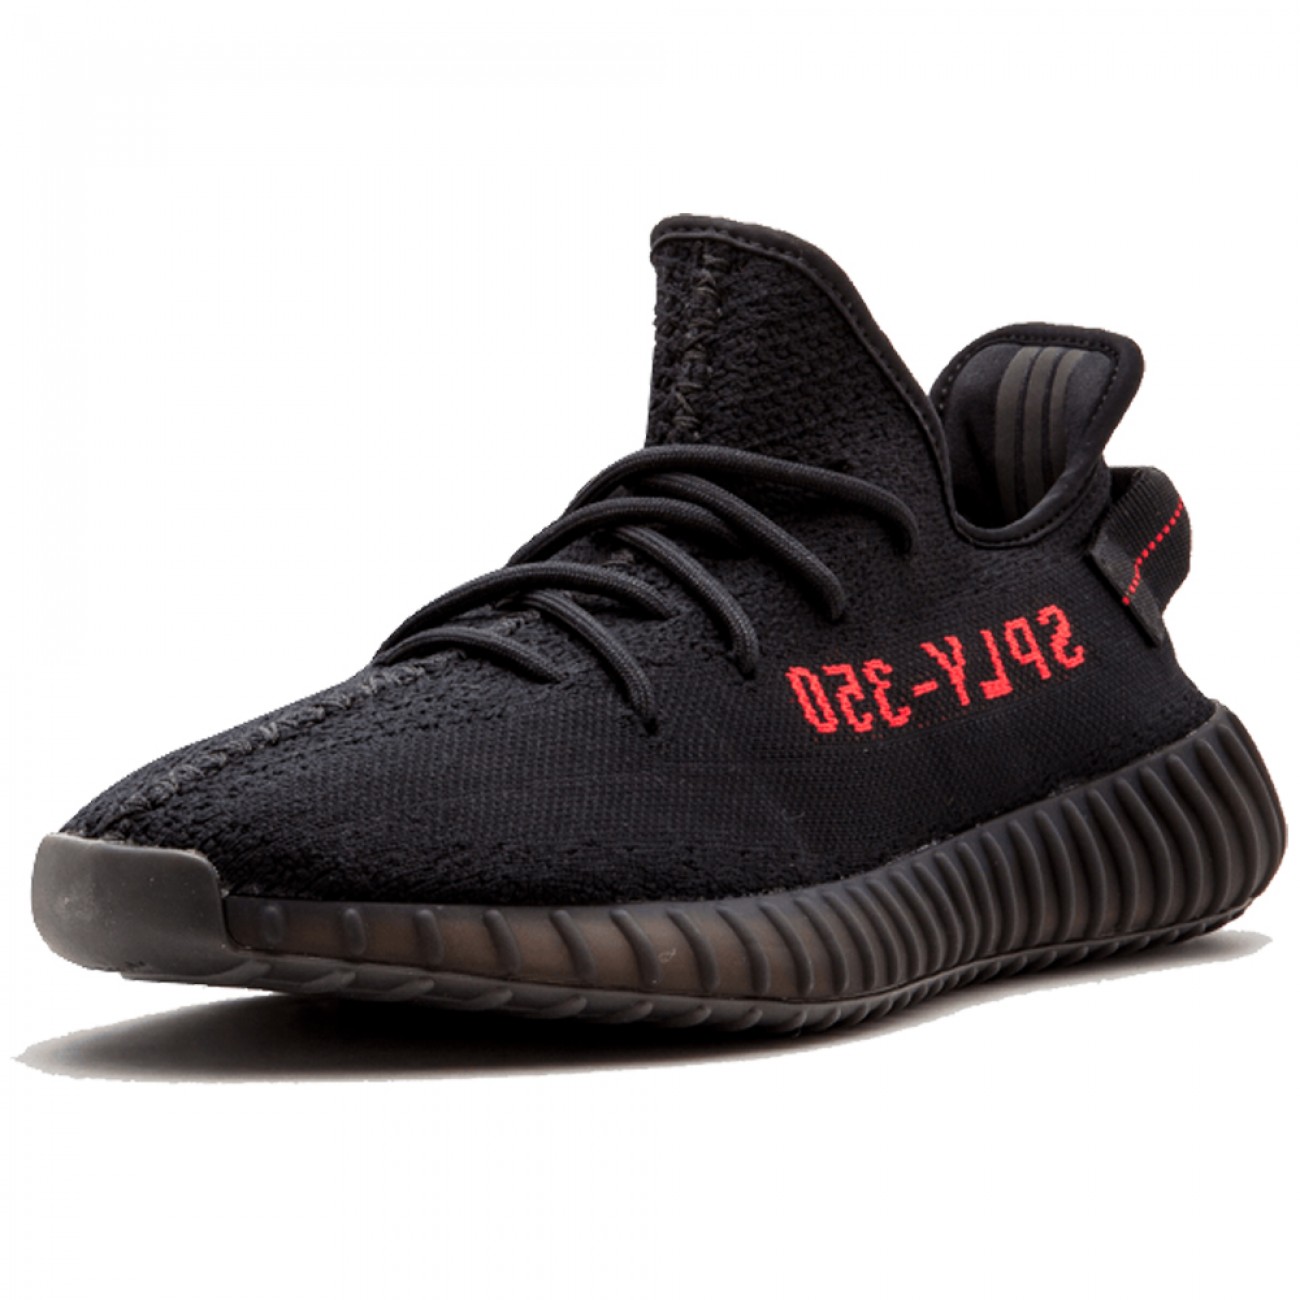 Adidas Originals Yeezy Boost 350 V2 "Core Black/Red" Bred CP9652